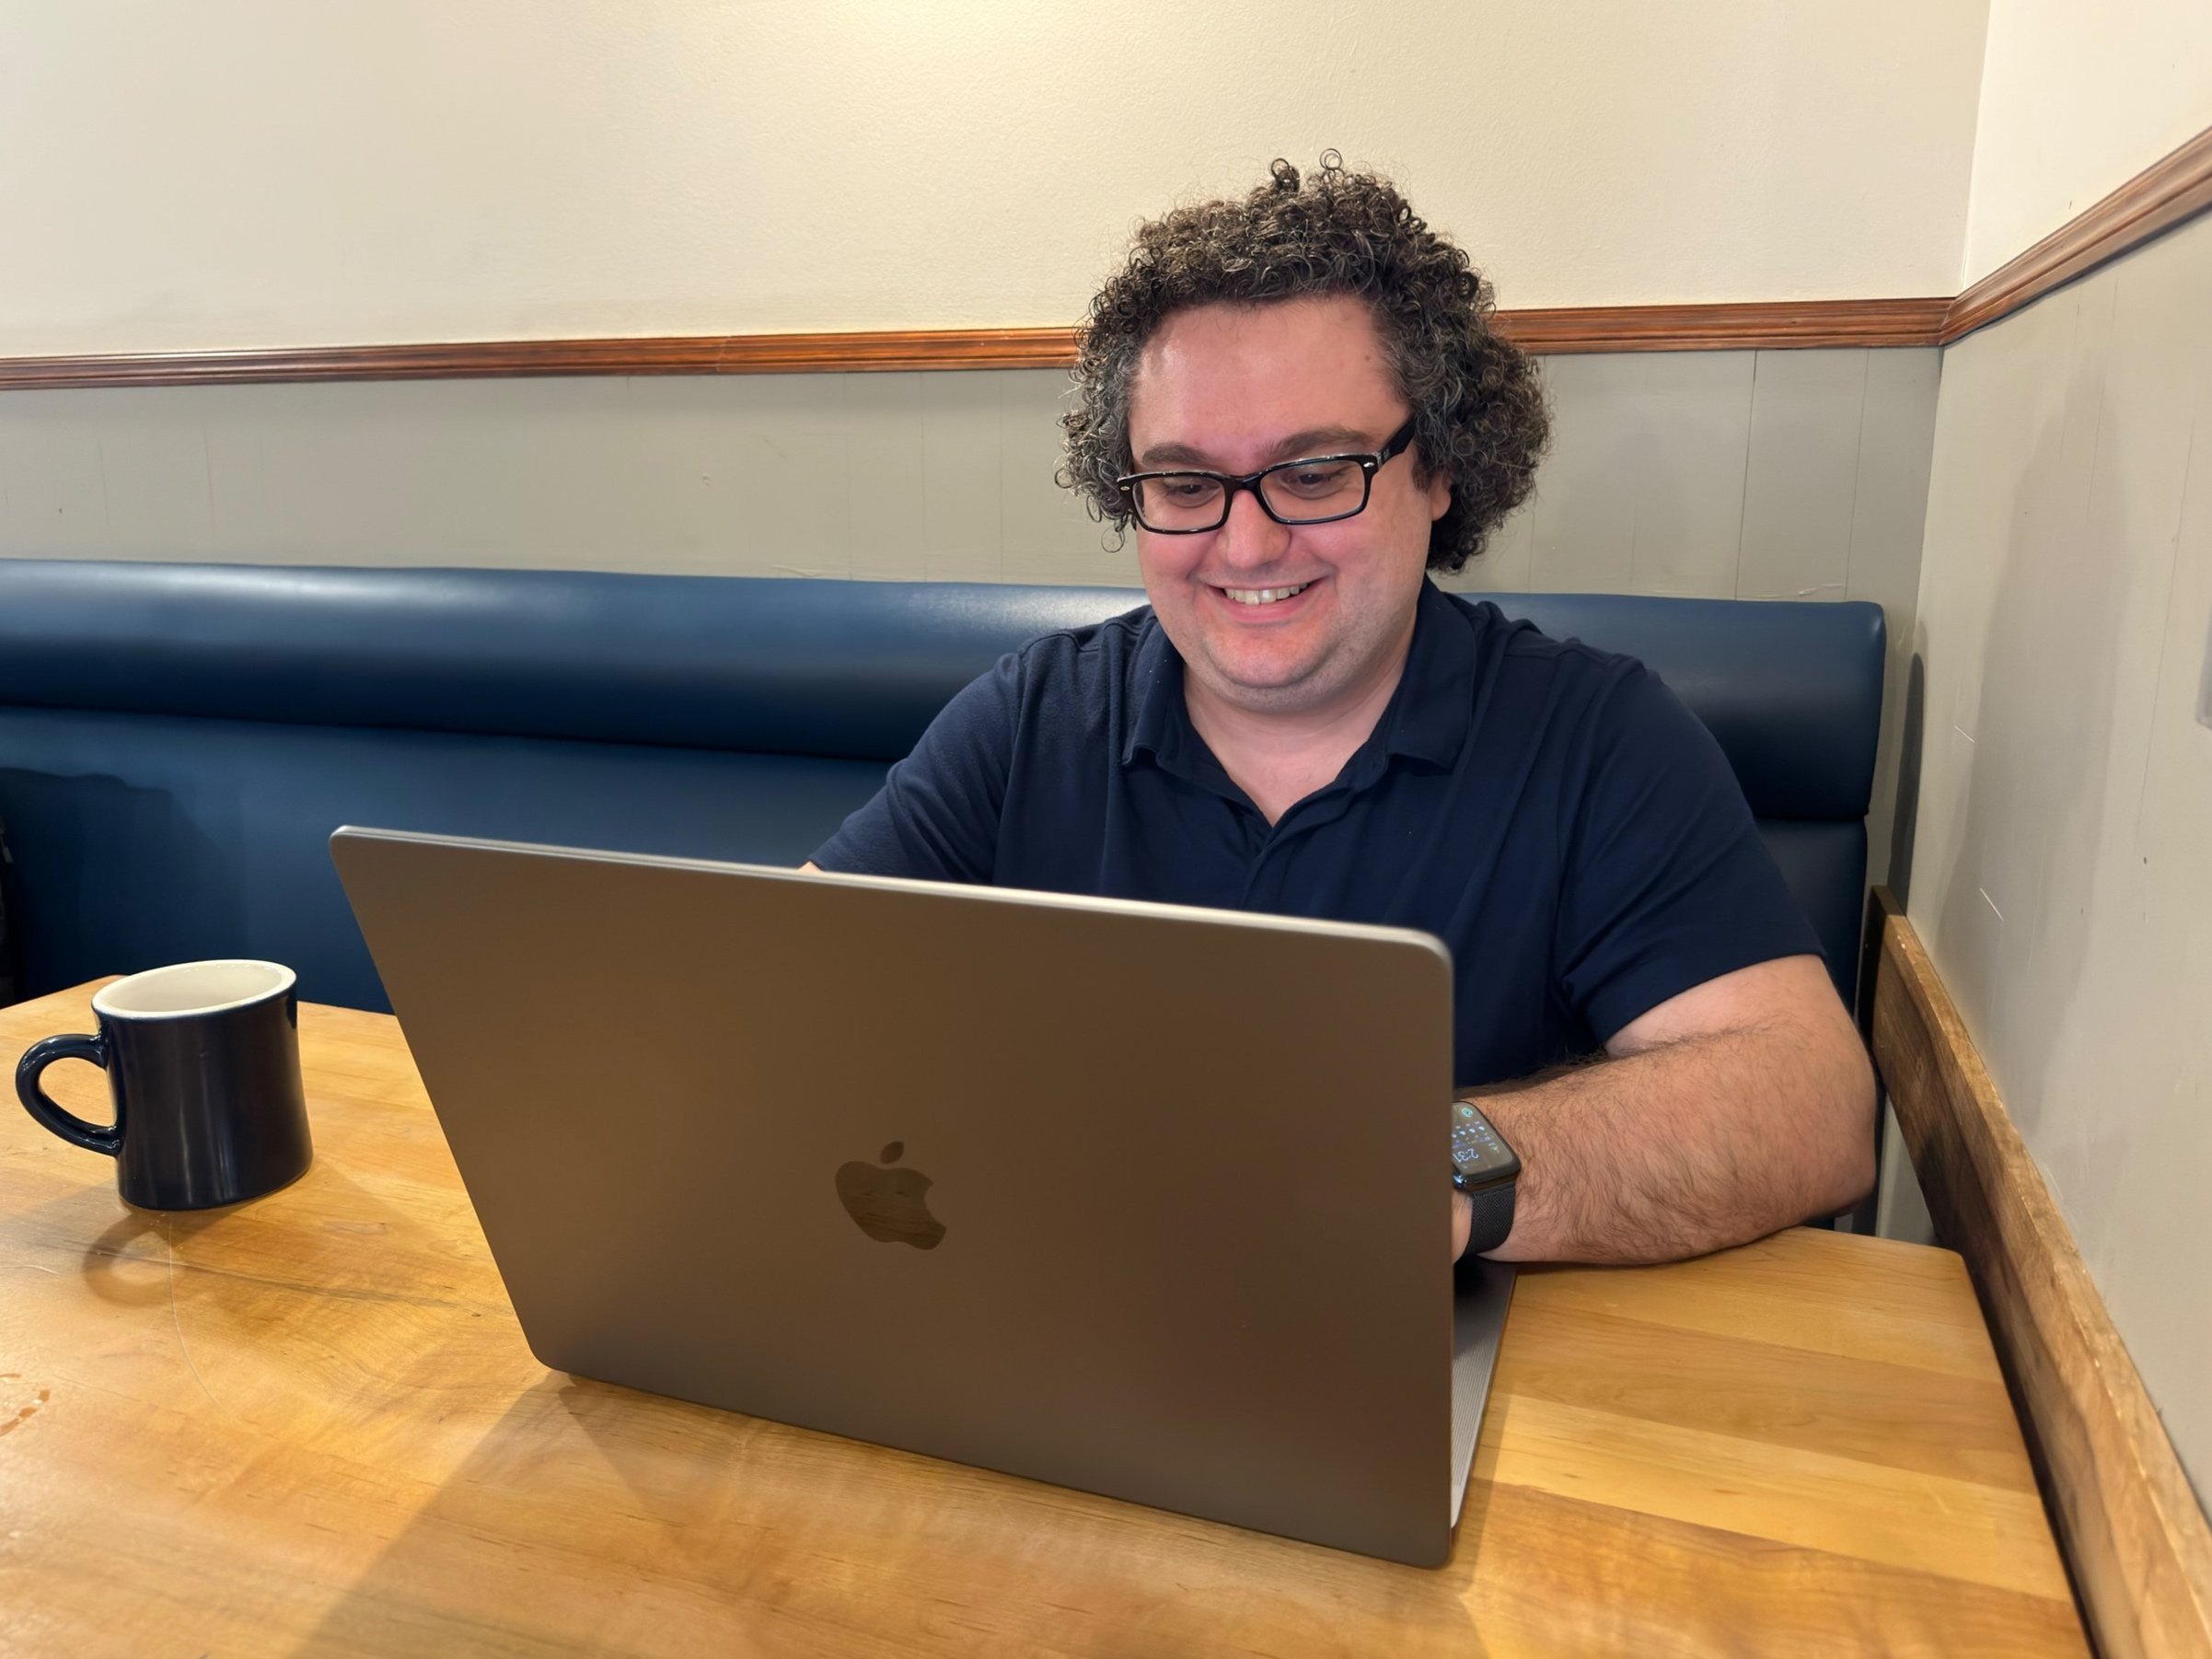  Tony sitting at a table smiling at a MacBook Pro.  A mug of coffee sits next to him on the table. 